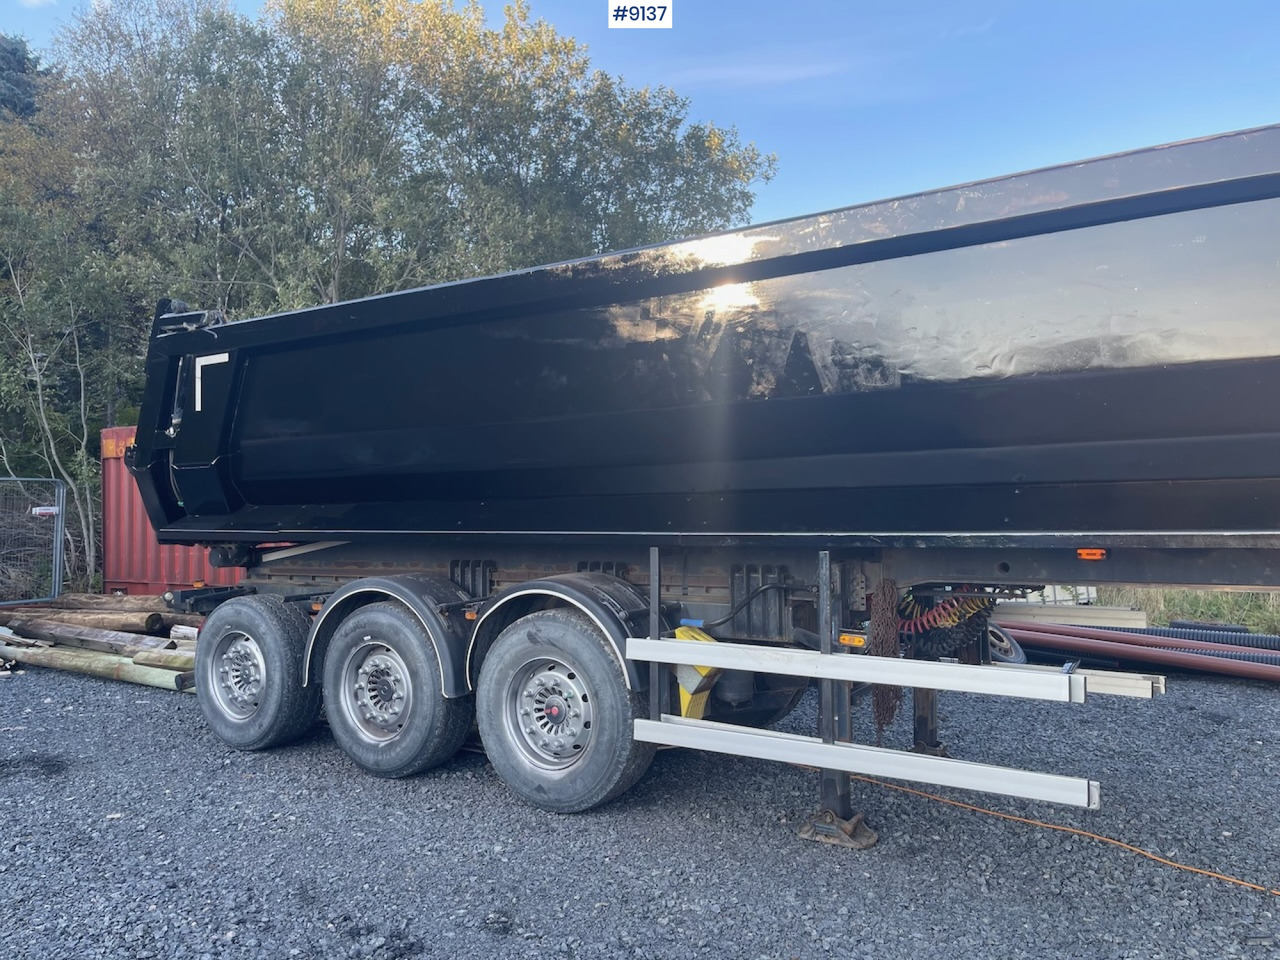 Leasing of  Carnehl tipping semi trailer in good condition Carnehl tipping semi trailer in good condition: picture 1